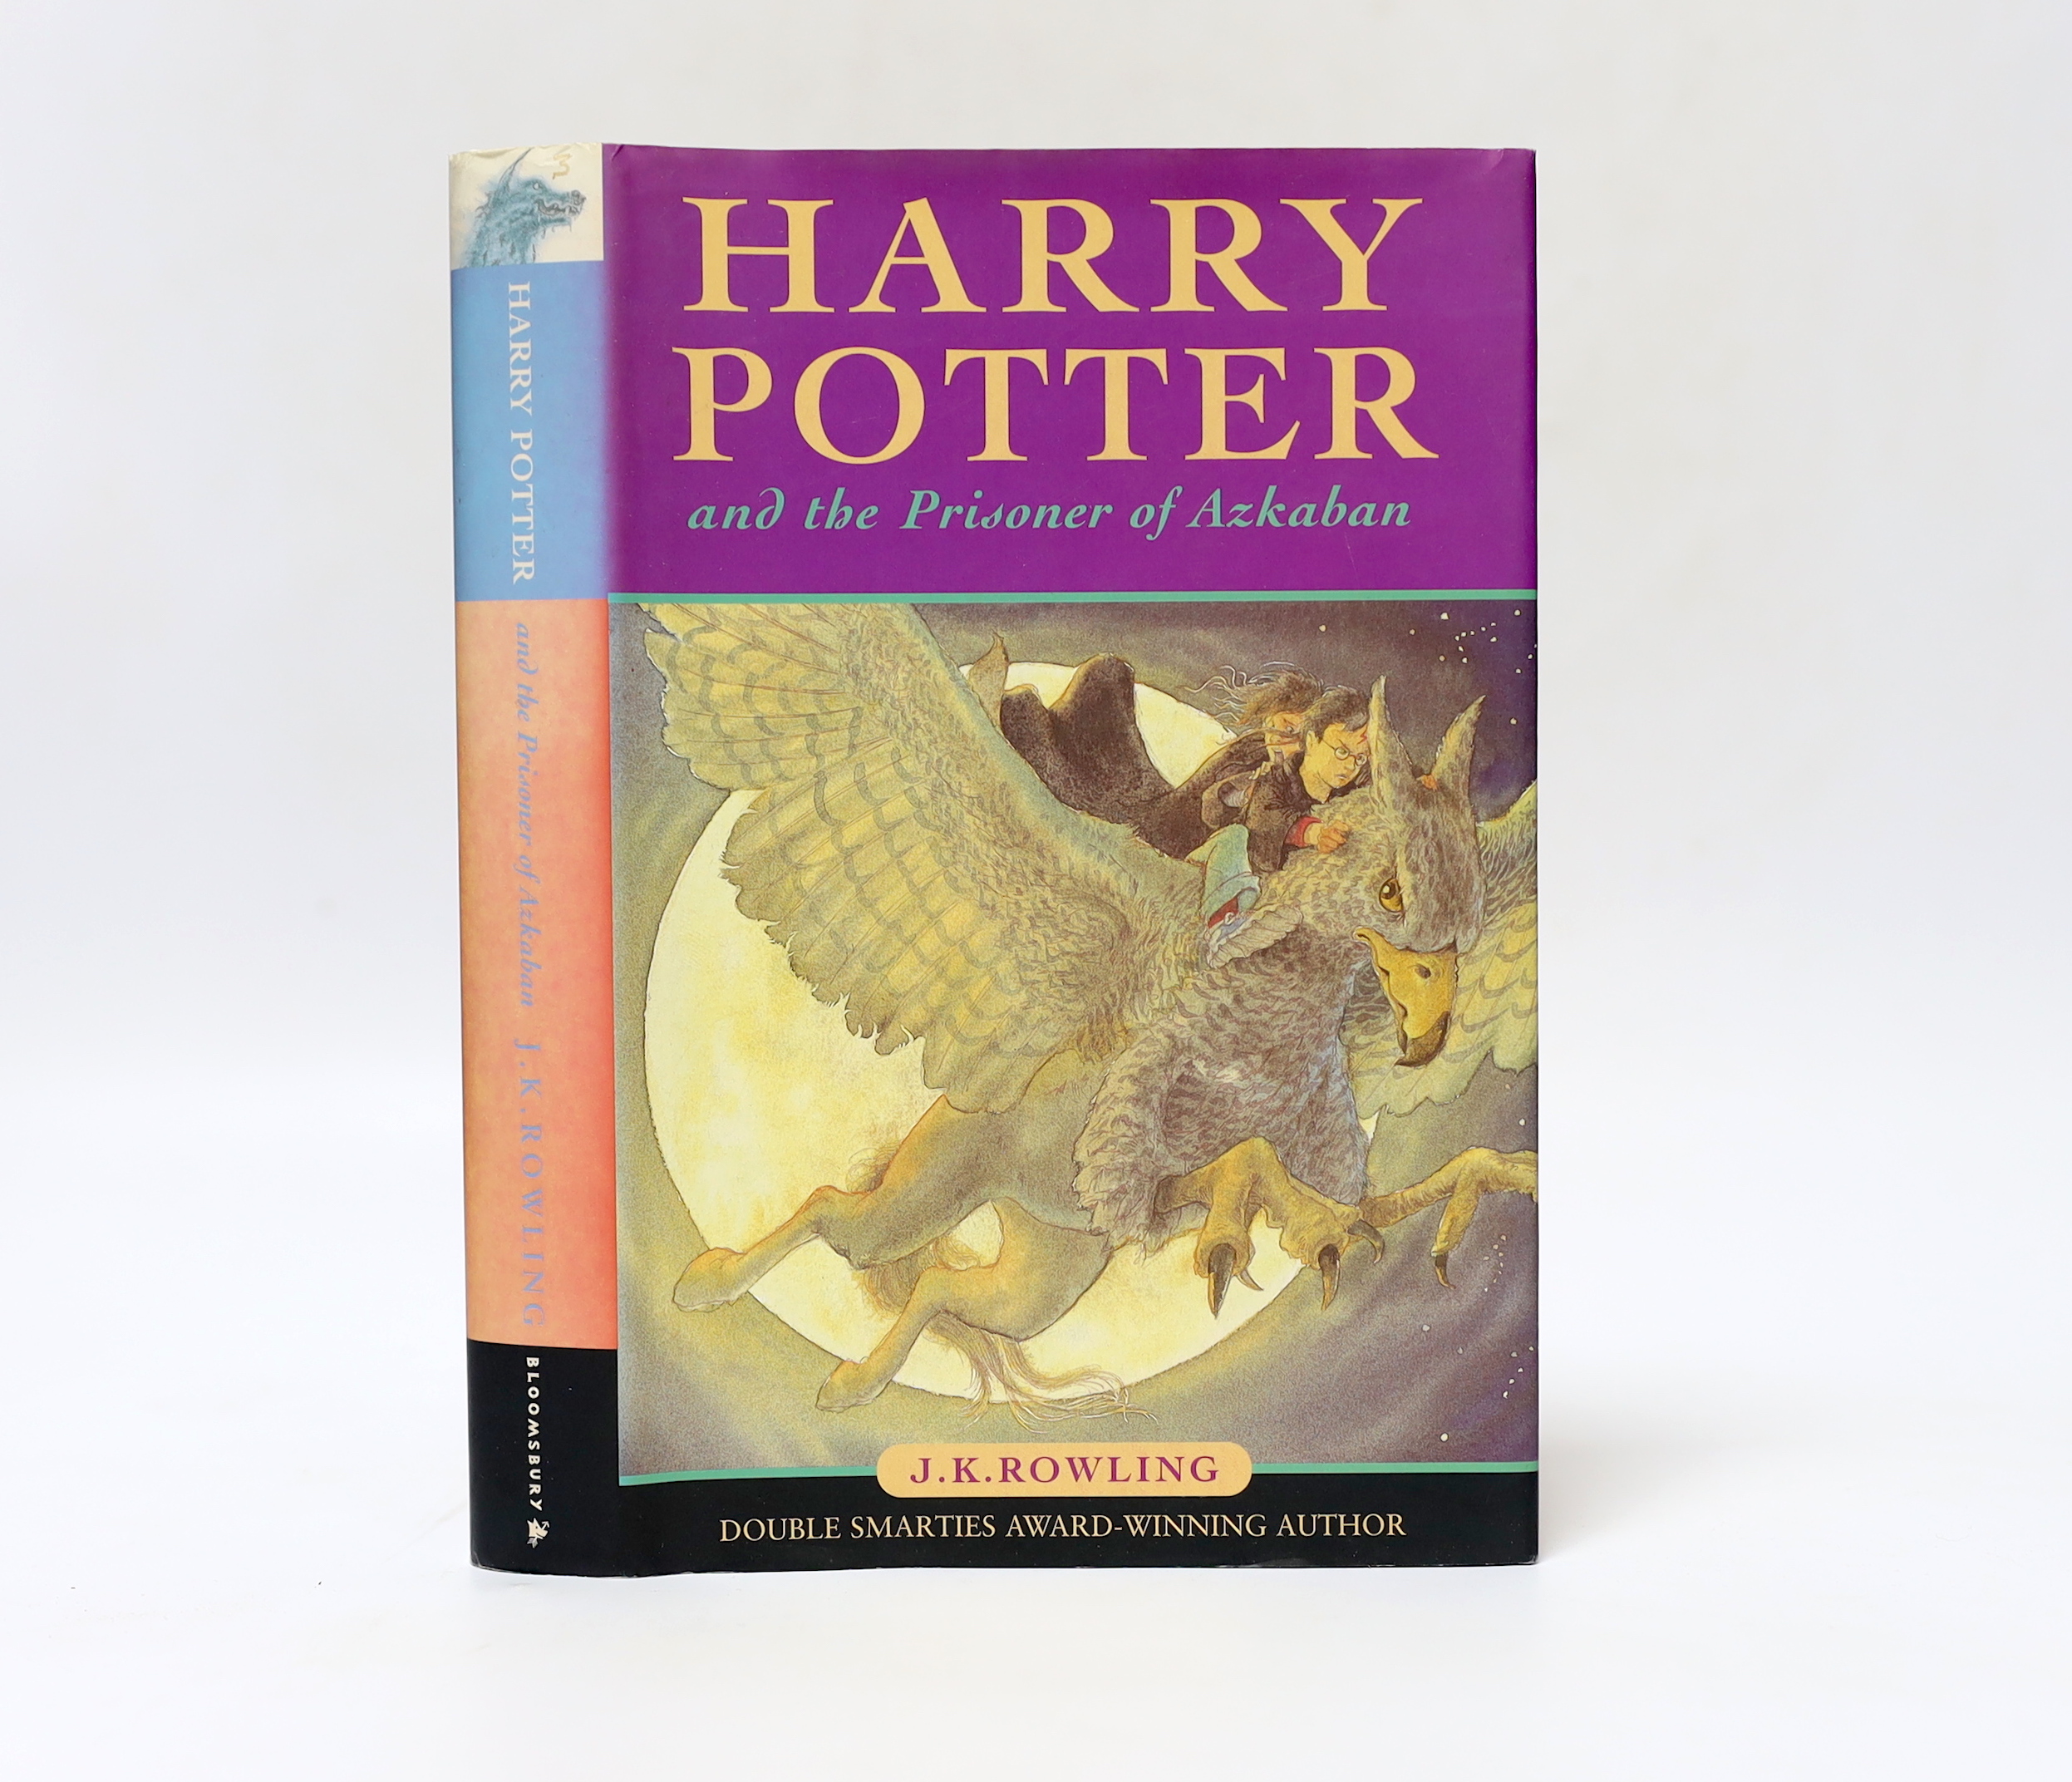 Rowling, J.K - Harry Potter and the Prisoner of Azkaban. First Edition (early reprint). armorial on half and title page; publisher's coloured pictorial boards and d/wrapper, 1999